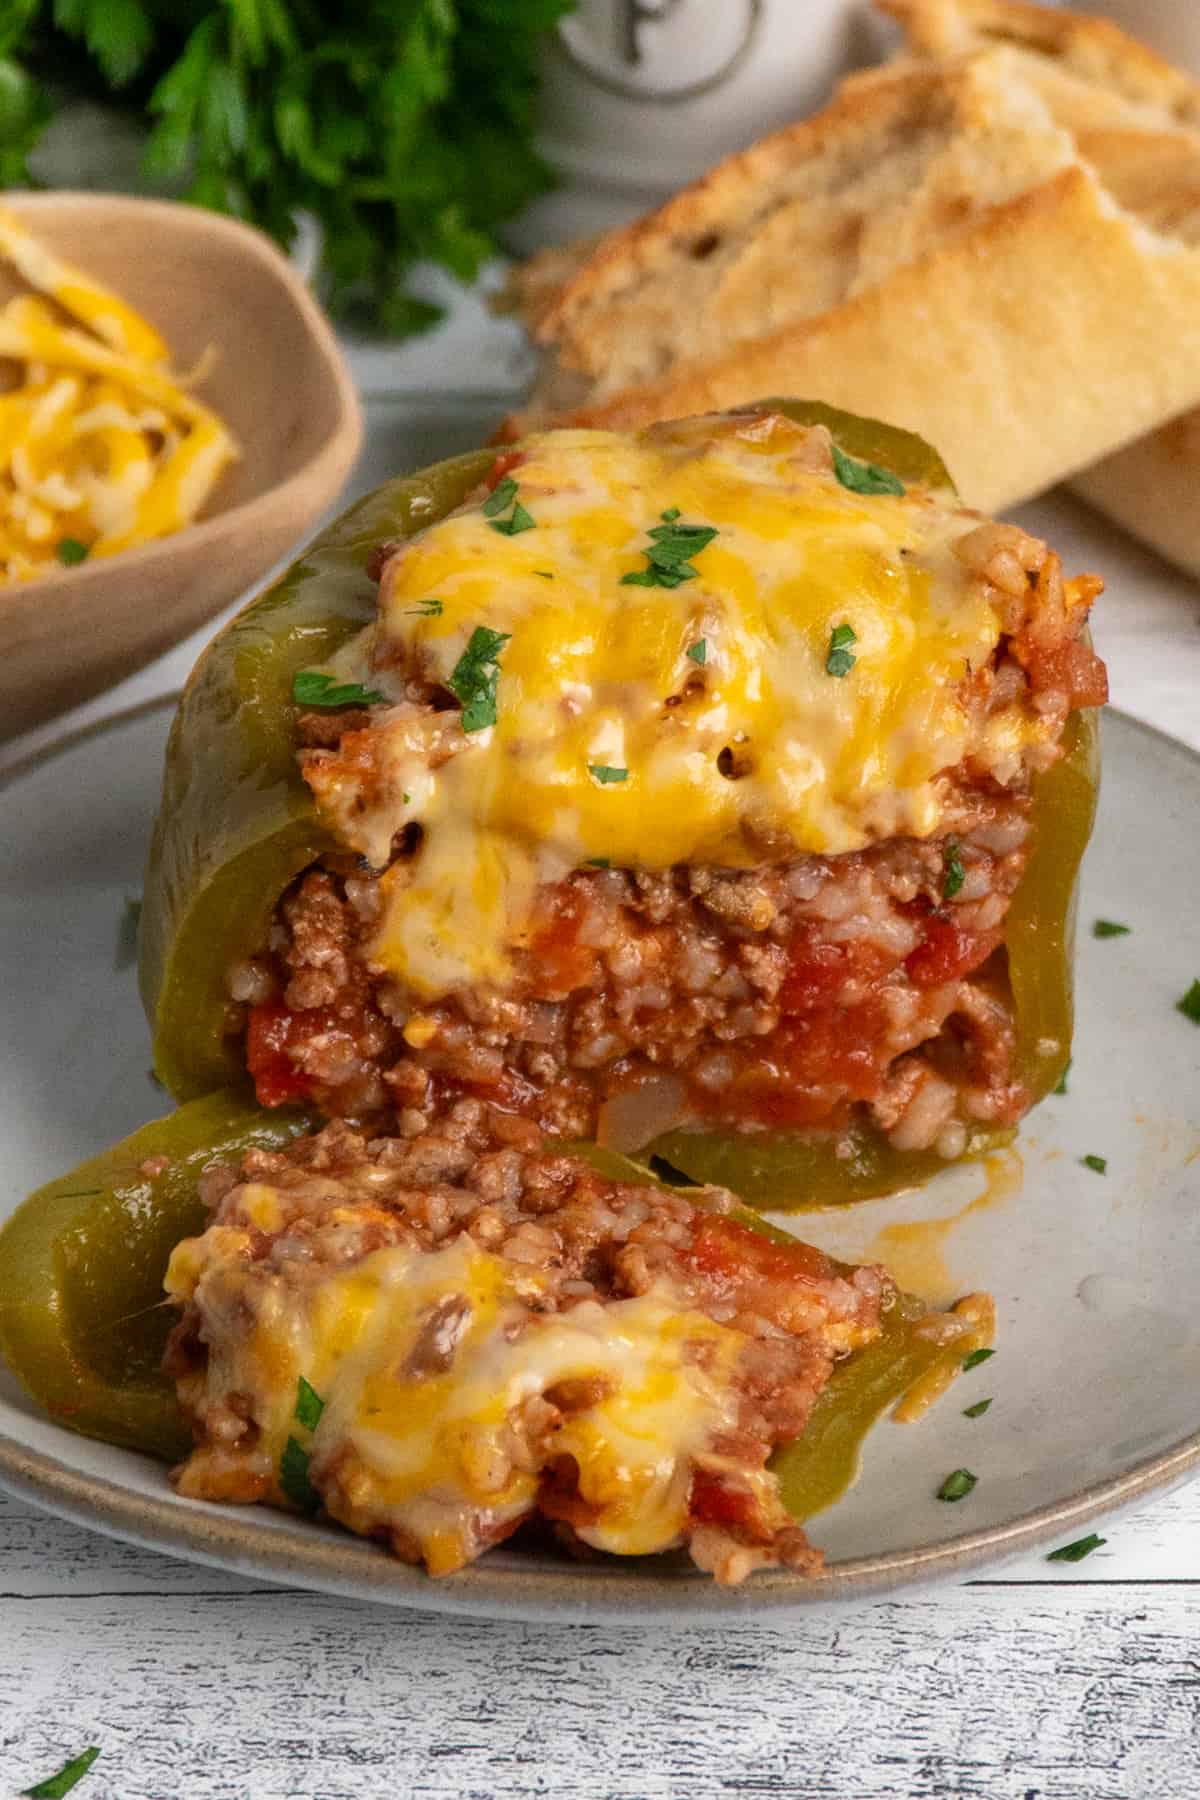 a stuffed pepper slice open to see the inside